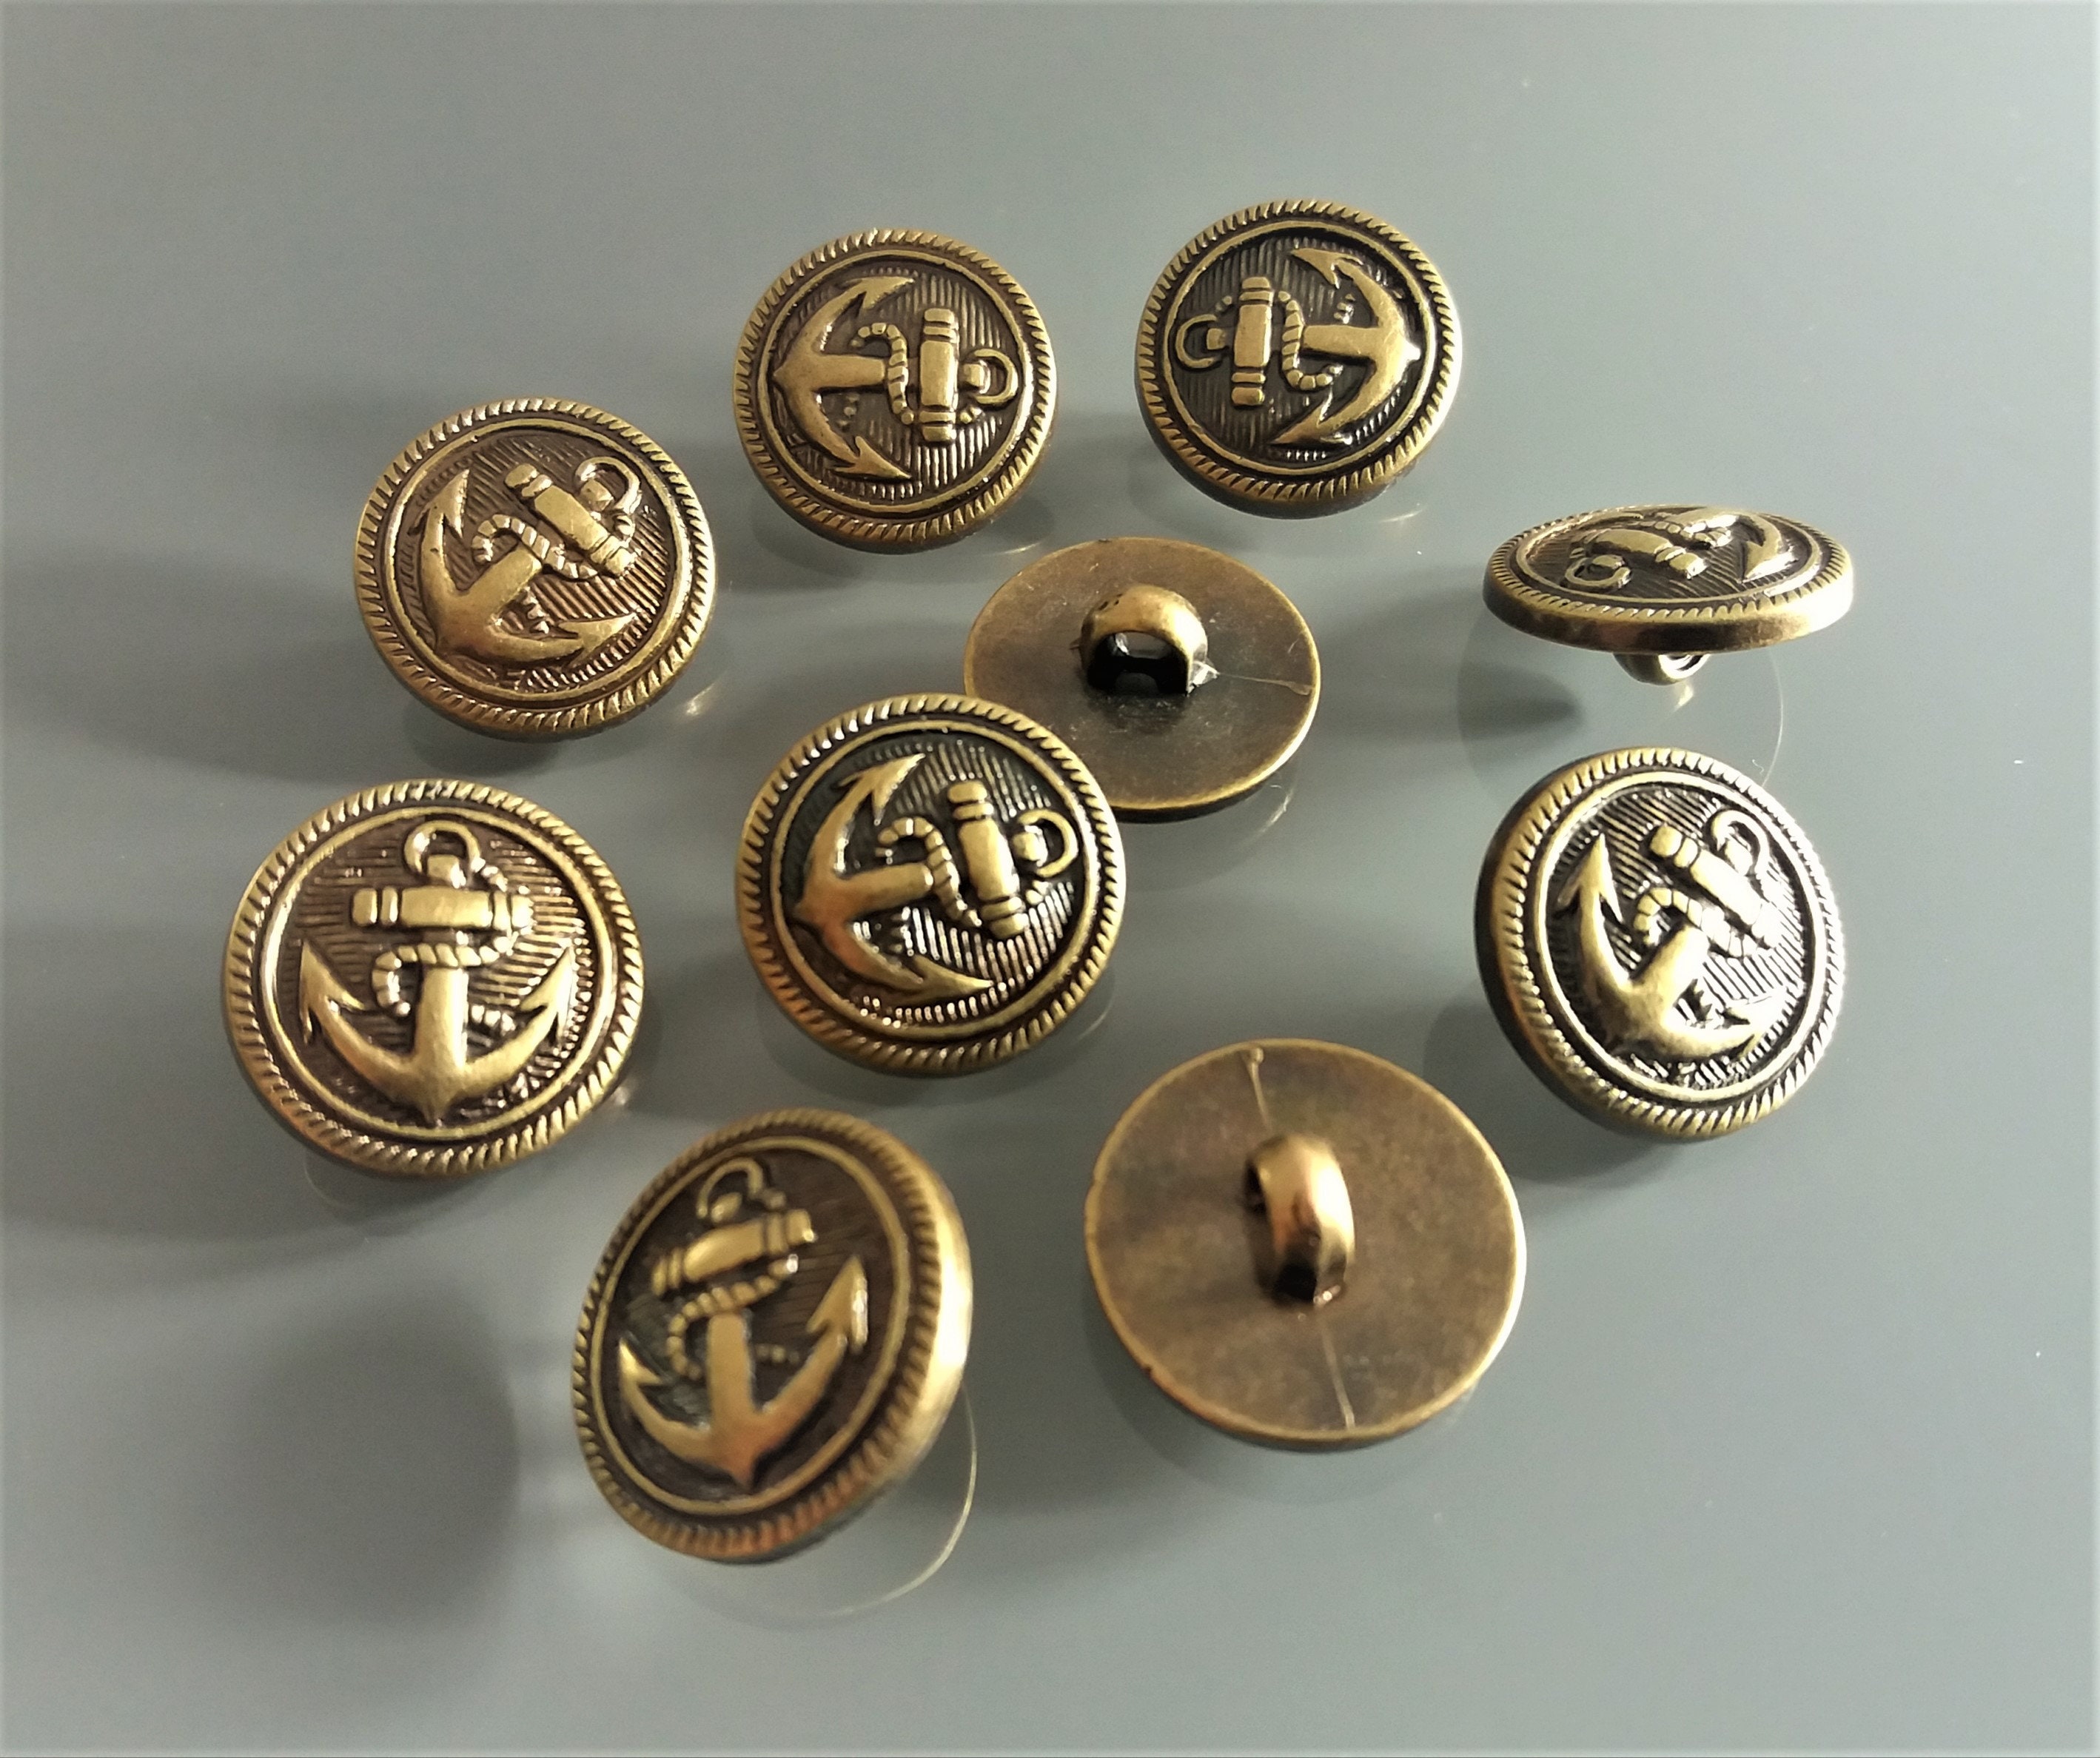 ZYAMY 10pcs Bronze Mushroom Domed Buttons Antique Brass Dome Buttons Round  Sewing Buttons with Shank, 15mm